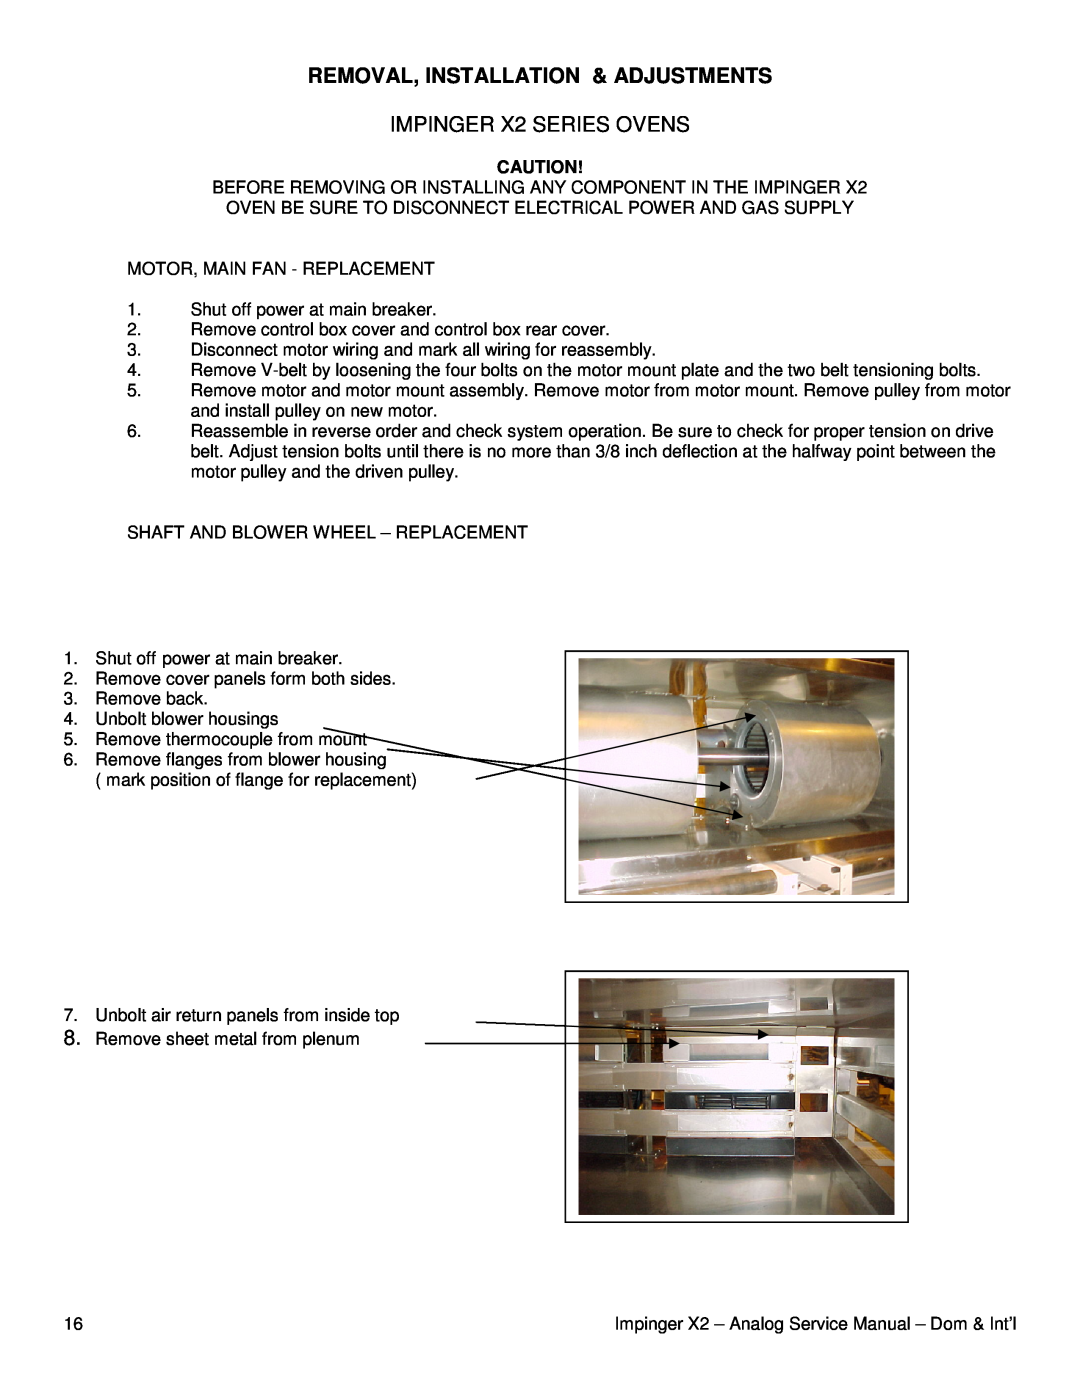 Lincoln 3270-2, 3262-2, 3240-2 service manual IMPINGER X2 SERIES OVENS, Removal, Installation & Adjustments 